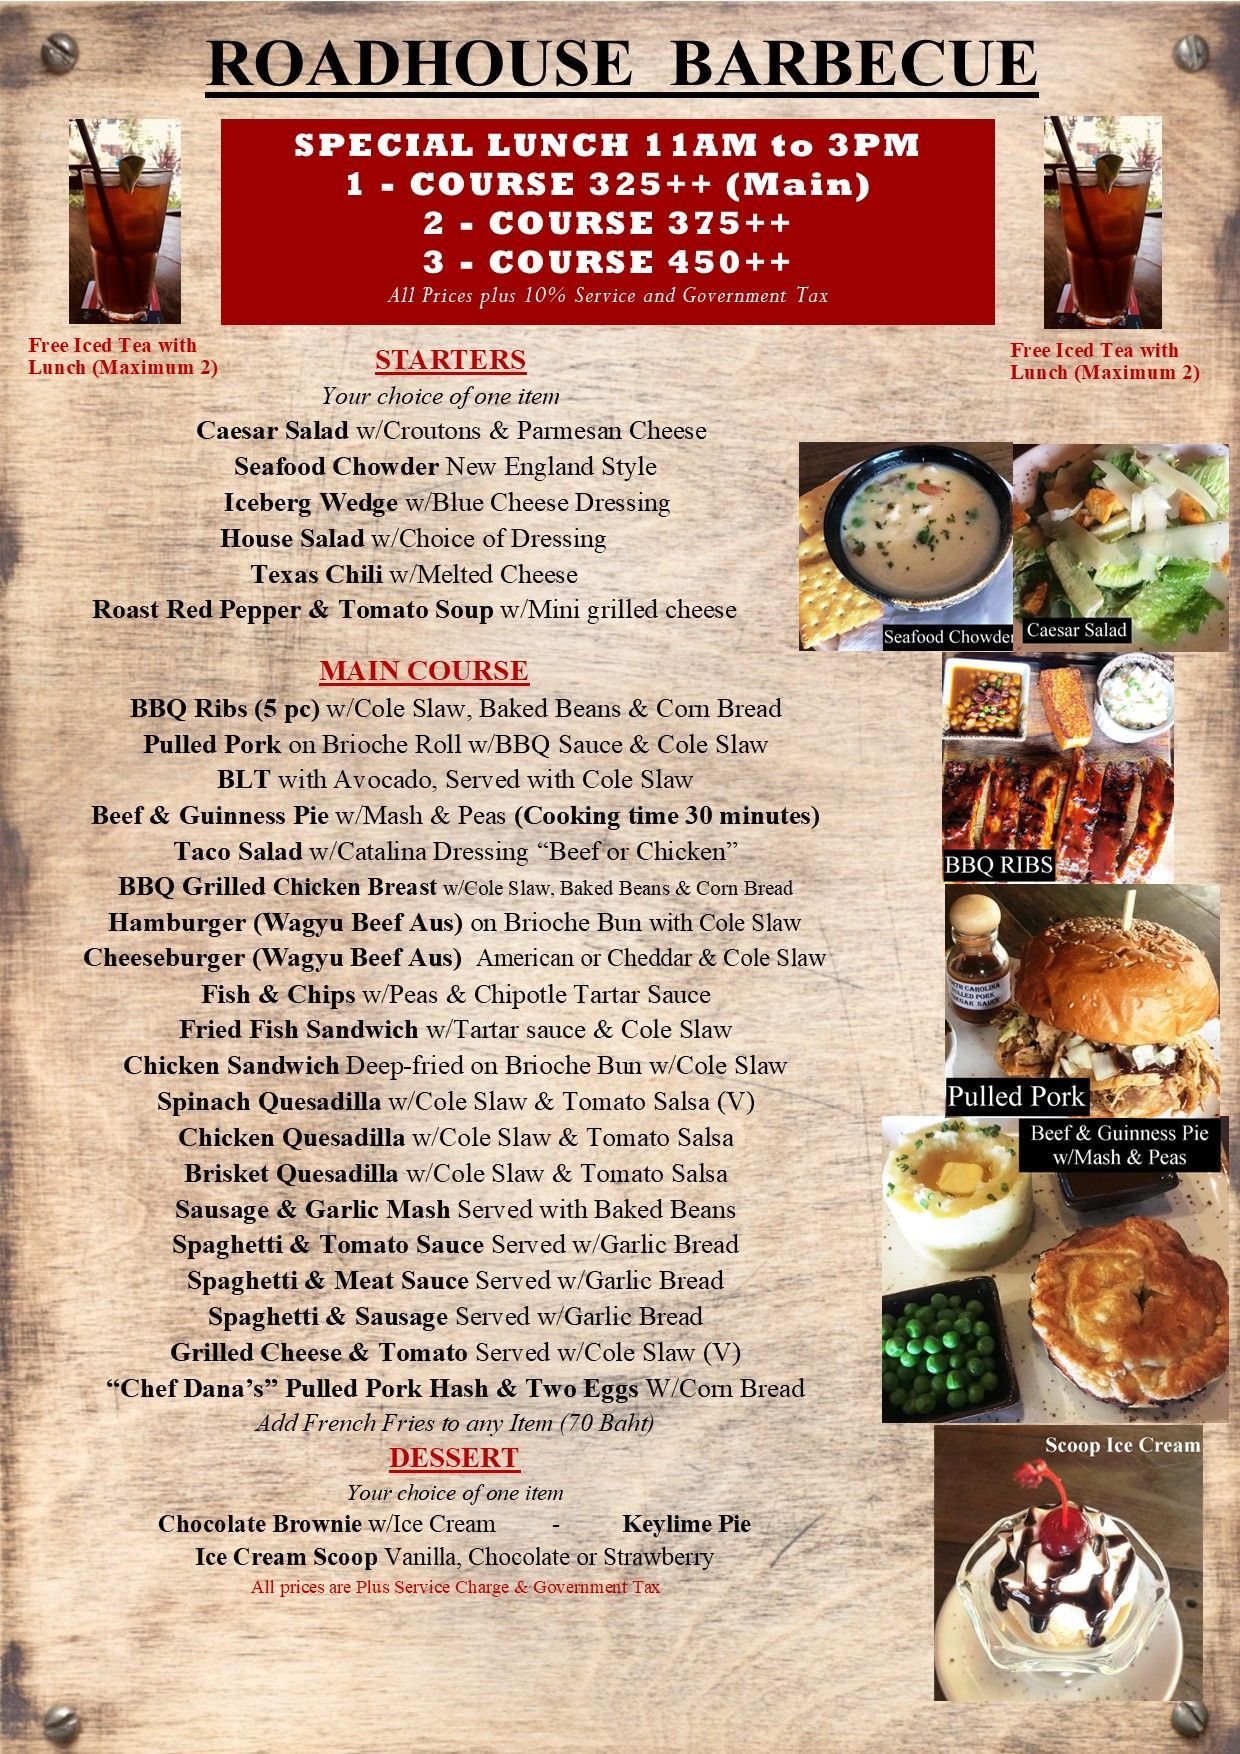 A menu for a restaurant called roadhouse barbecue